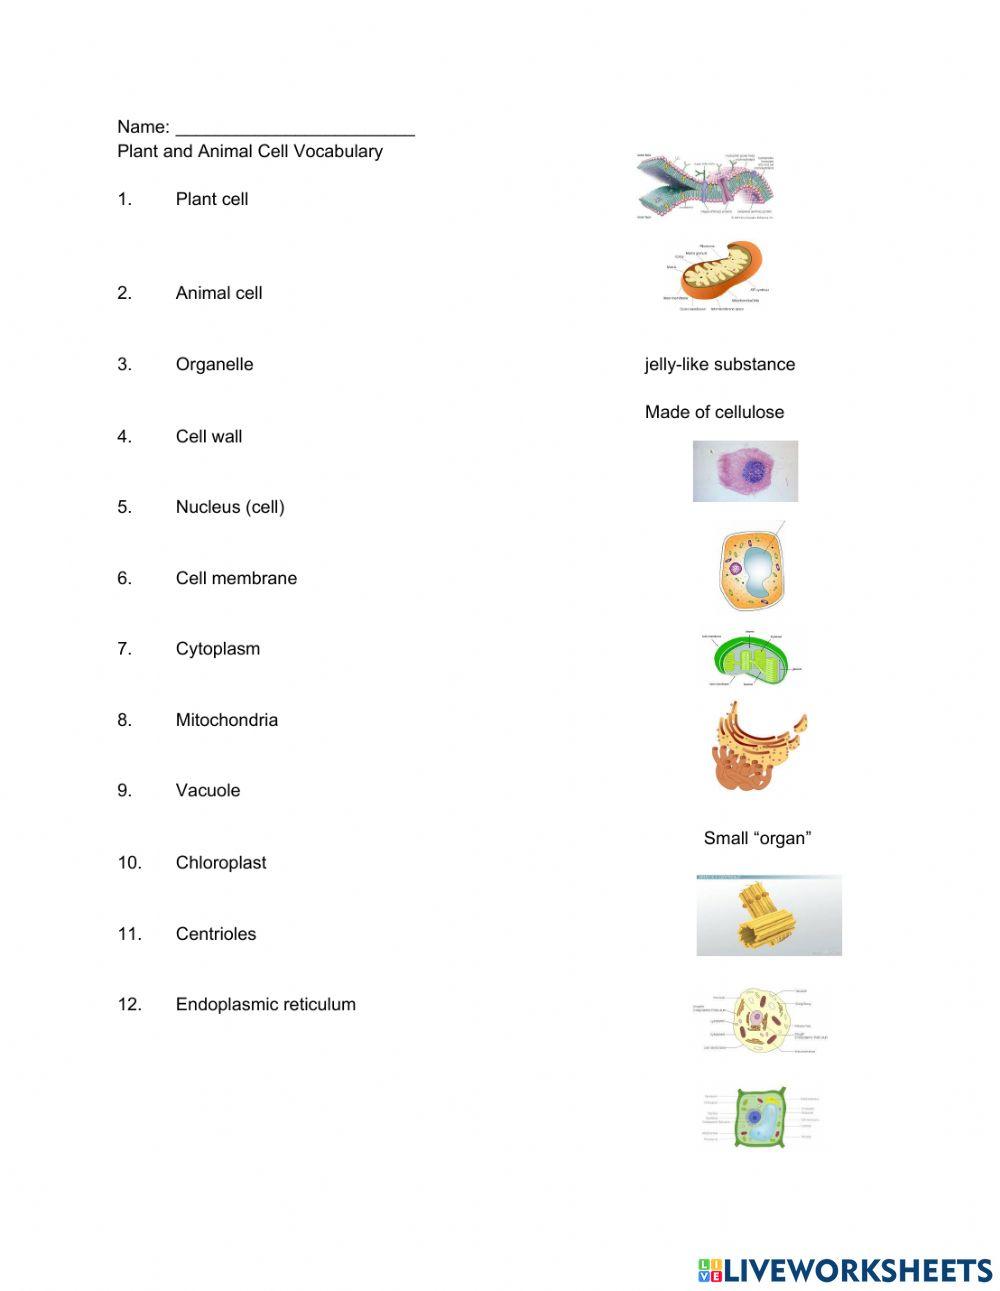 Plant and Animal Cells Vocabulary